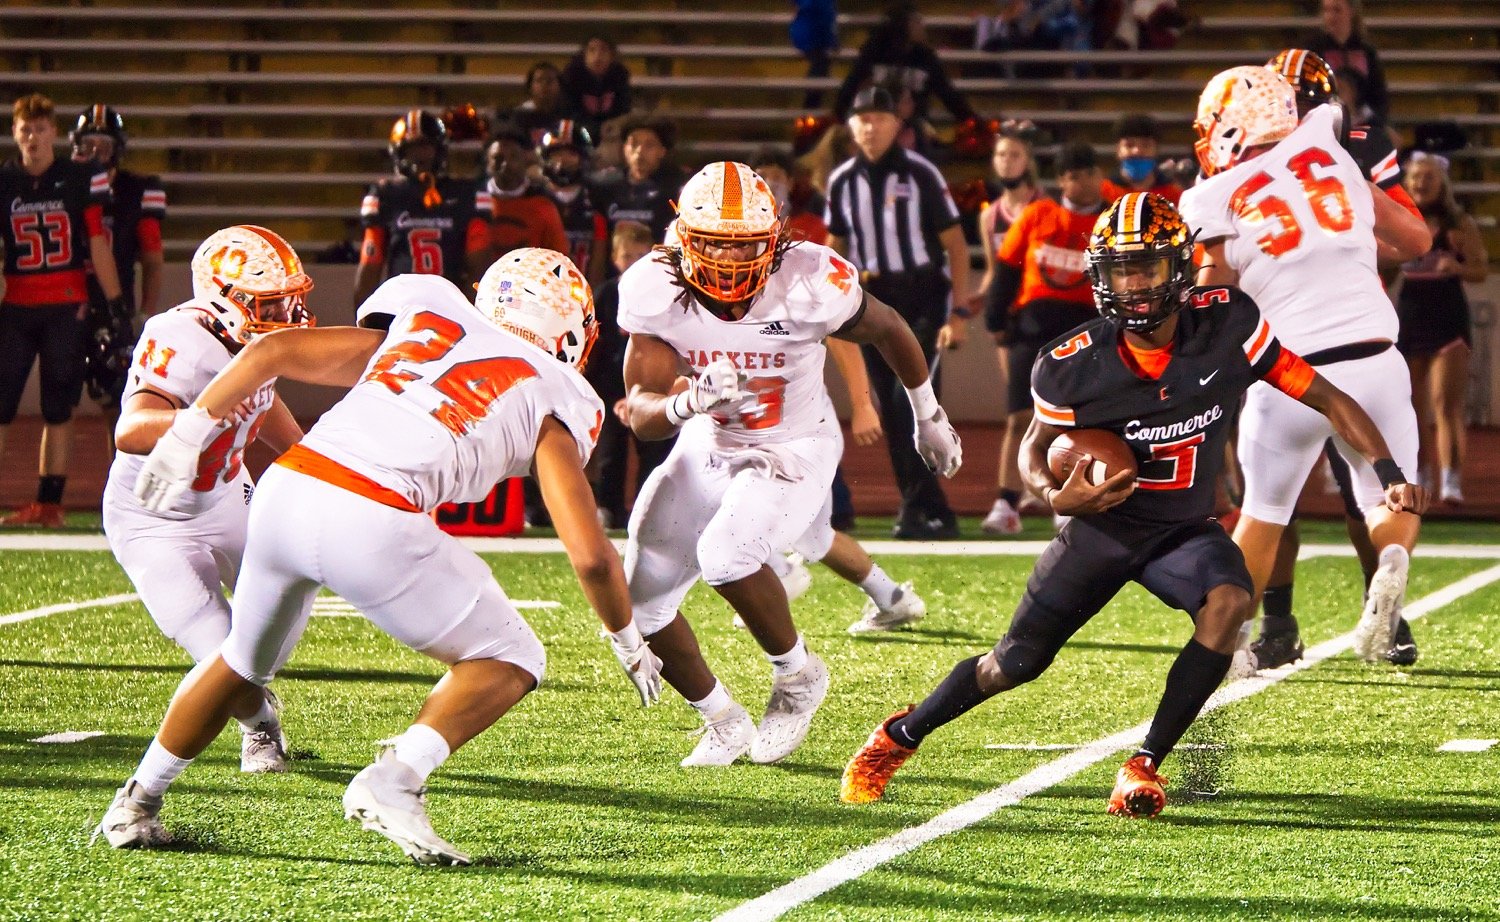 Hunter Wright, 40, Kobe Kendrick, 24, and Trevion Sneed have the crafty Commerce quarterback surrounded, with almost nowhere to run.
[see more action and buy prints]